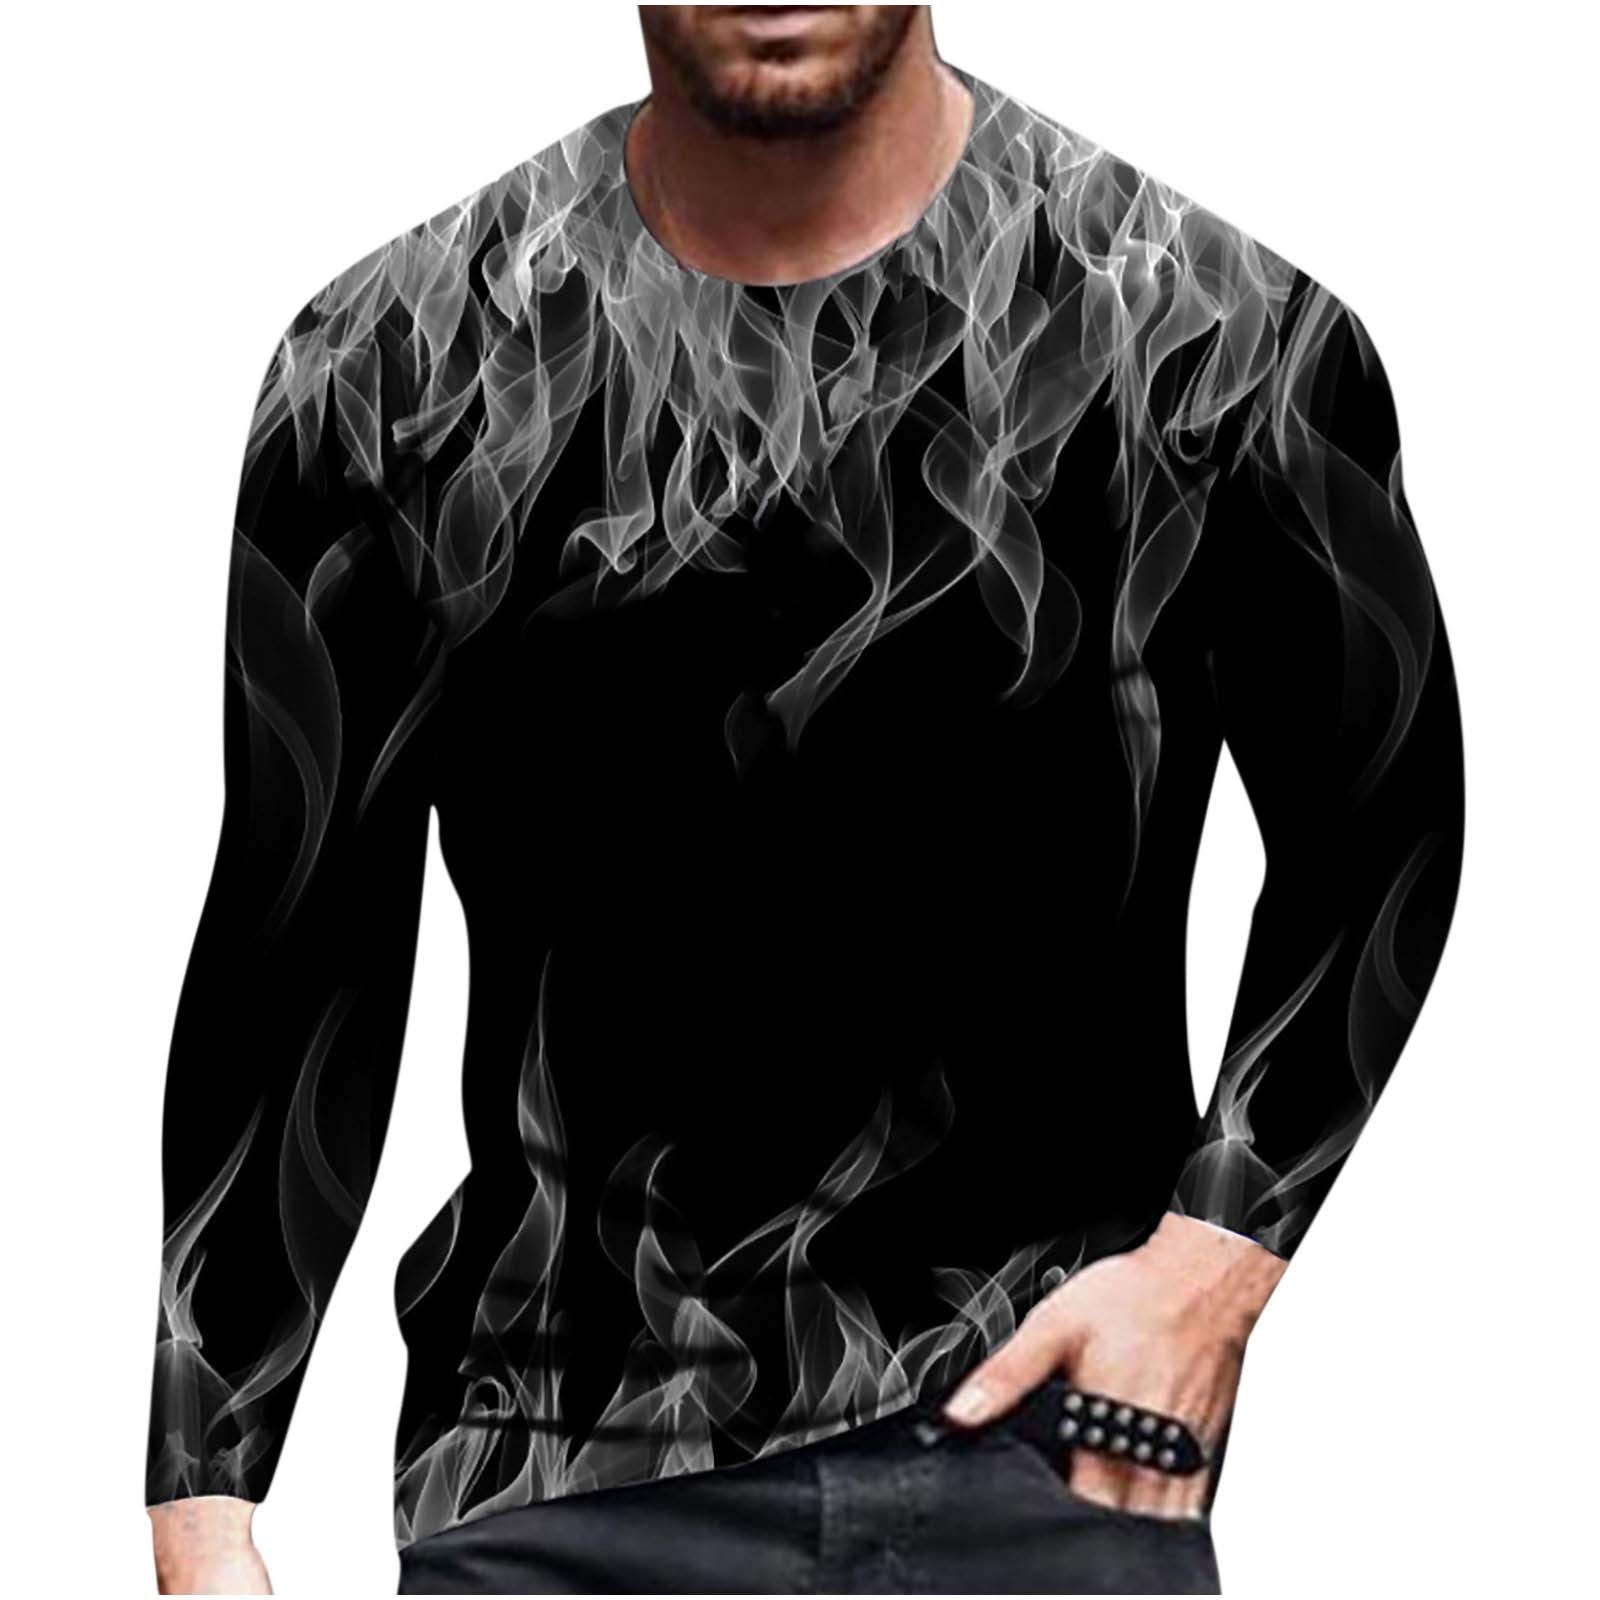 Long Sleeve T-Shirts for Men Fashion Realistic 3D Digital Fire Printed  Tshirt Muscle Workout Athletics Tee Tops 